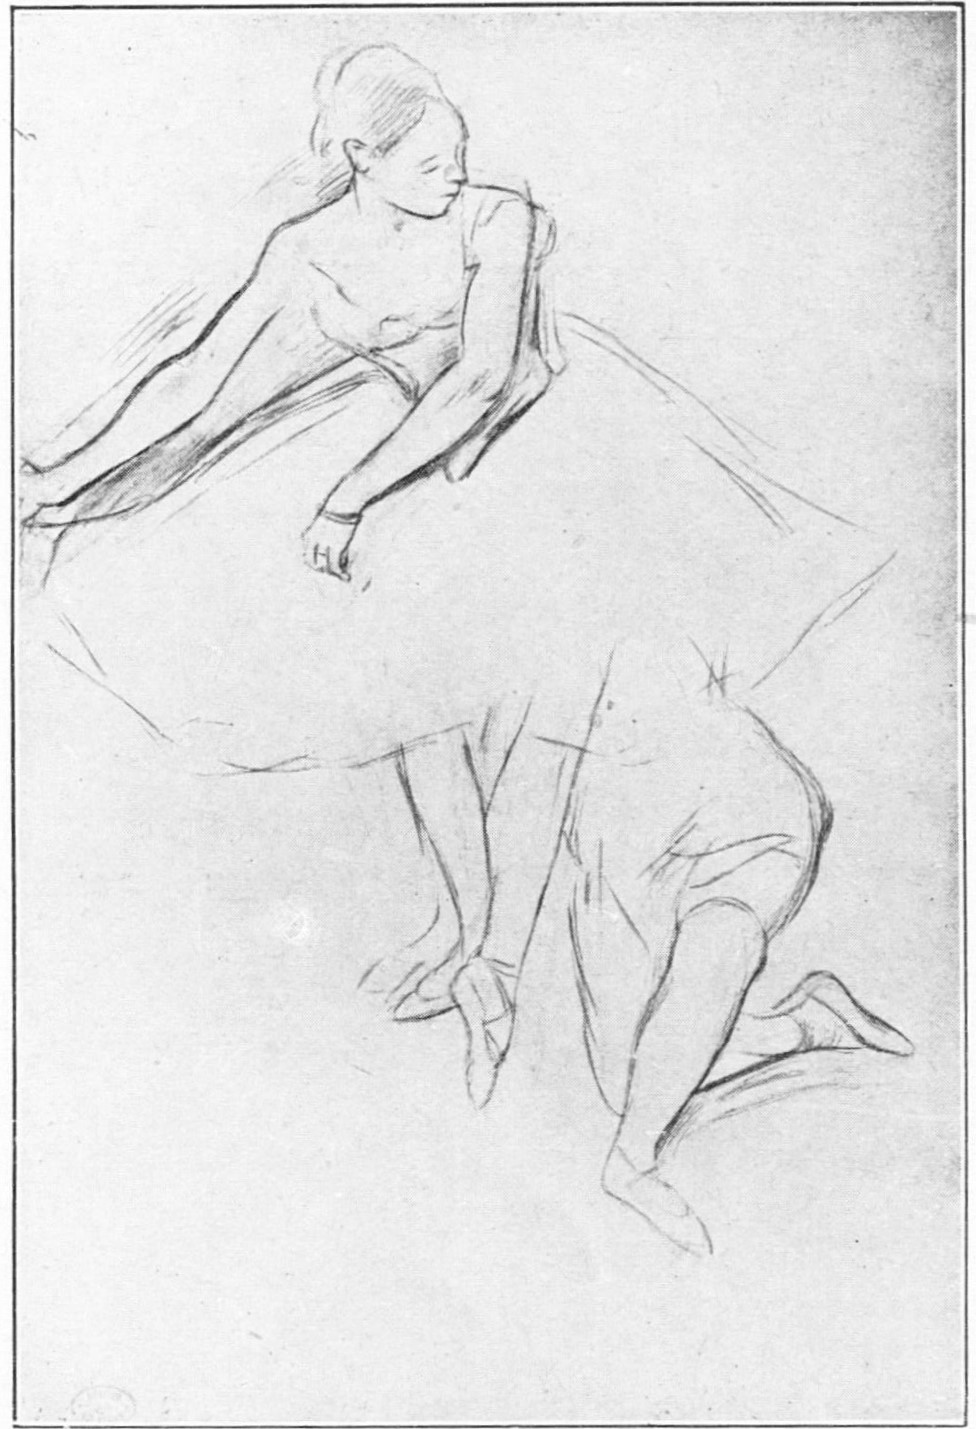 A lead drawing of the outline of a woman wearing a tutu. Her arms are stretched out to the right side. Under the tutu or dress, there seems to be a figure’s lower body and legs sticking out.